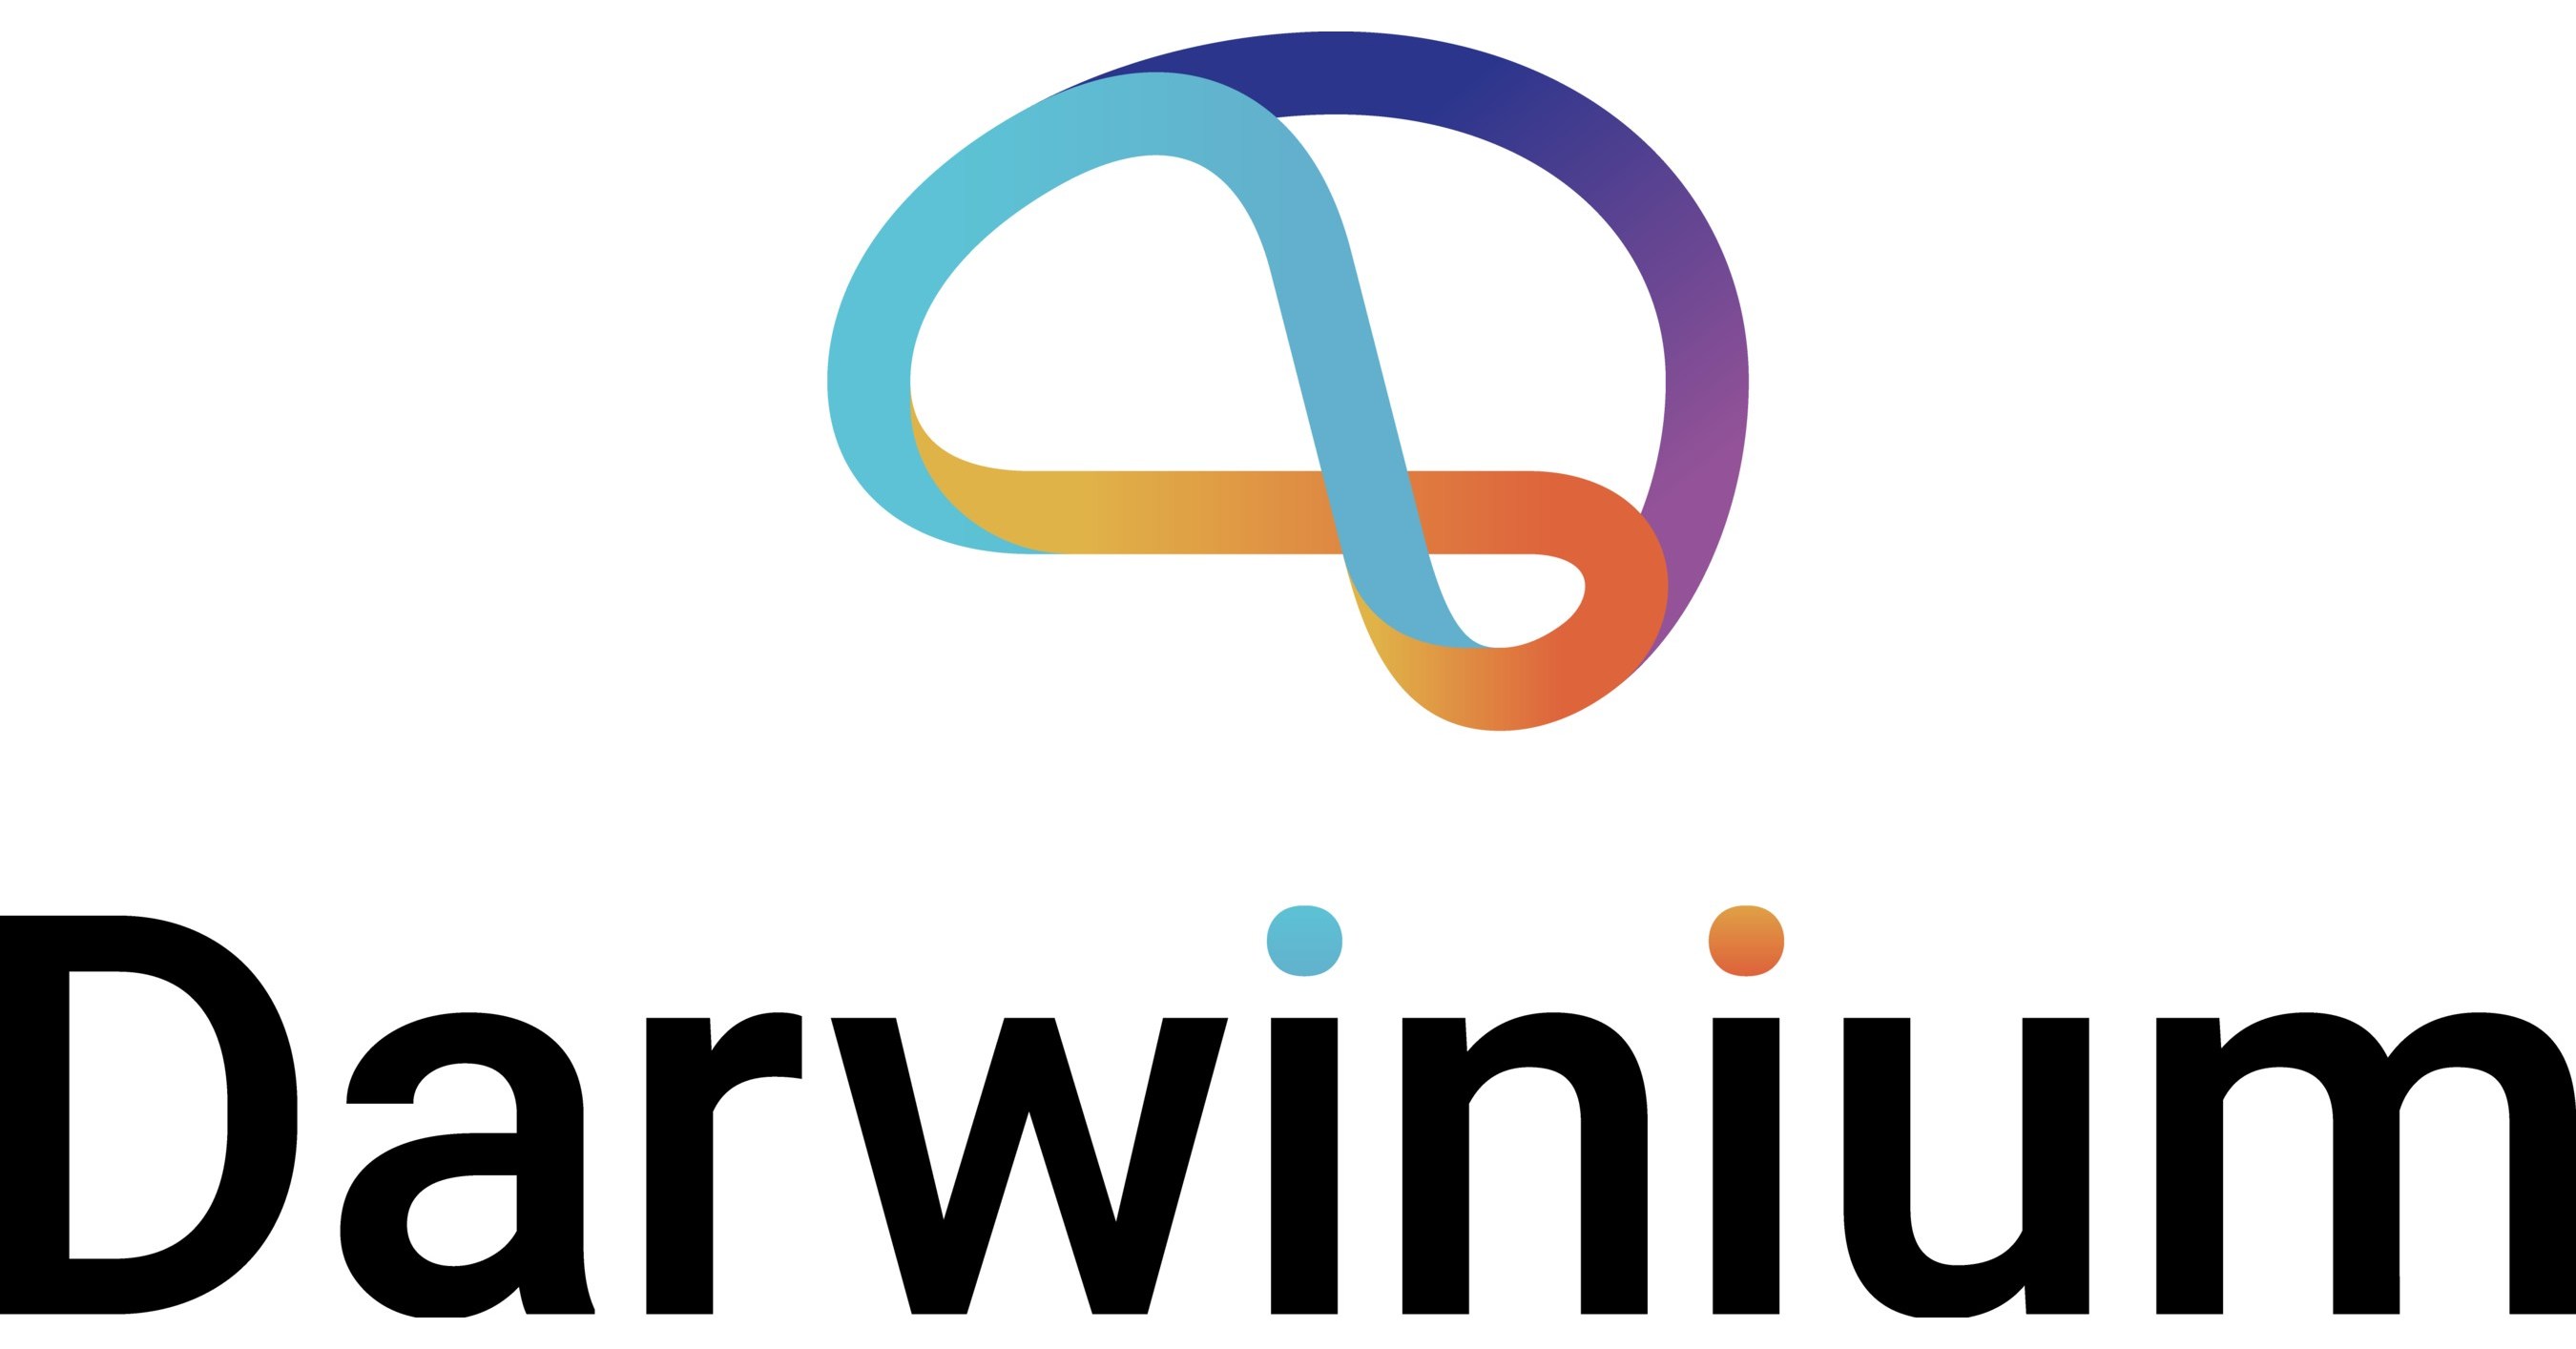 DARWINIUM, A NEXT-GENERATION FRAUD AND SECURITY PLATFORM, SECURES AN  INITIAL $10 MILLION FUNDING ROUND